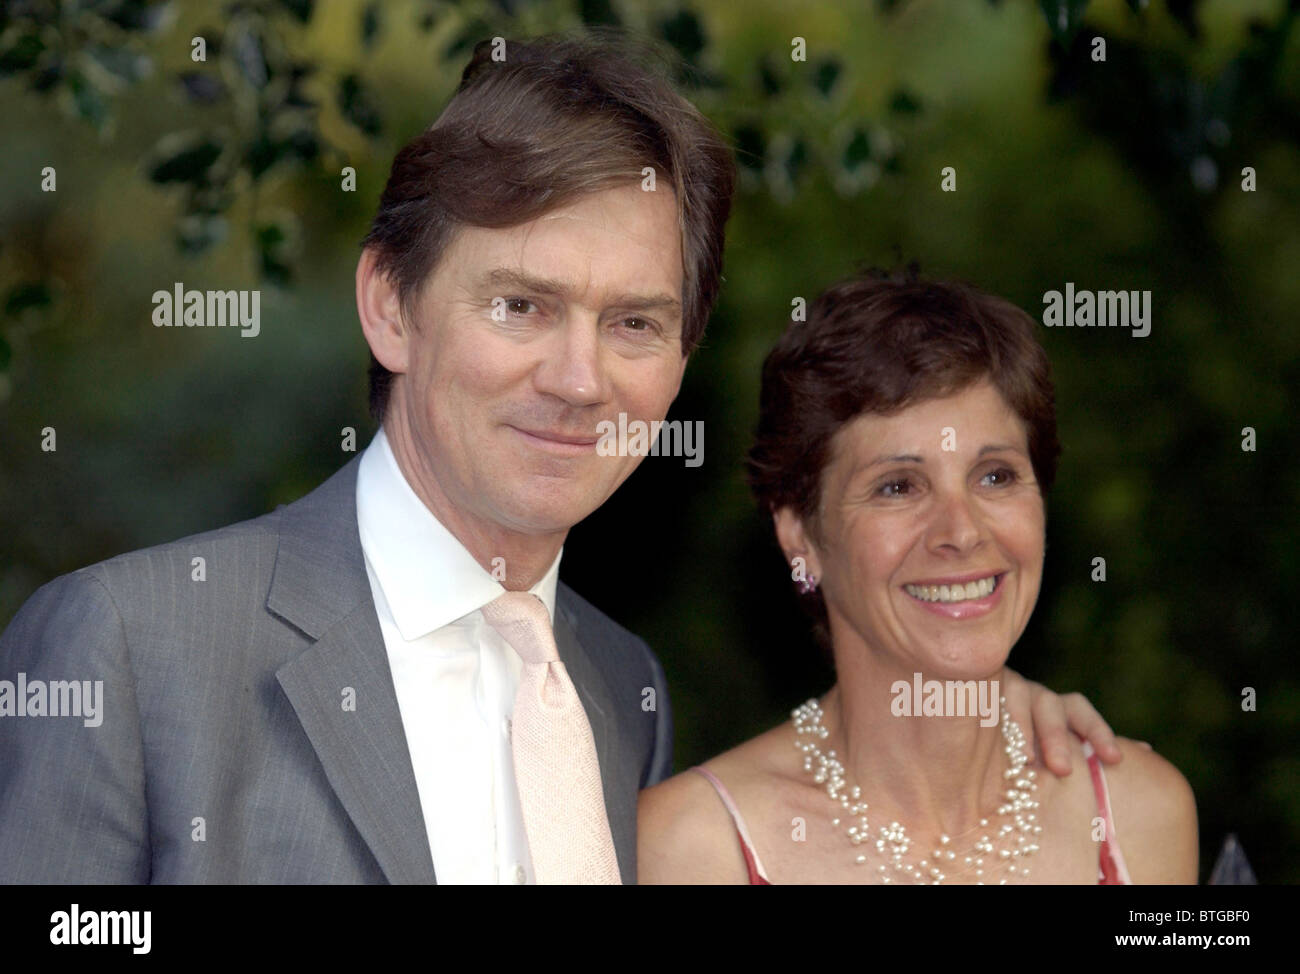 ACTOR ANTHONY ANDREWS AND HIS WIFE GEORGINA AT SOCIETY PARTY HOSTED BY DAVID FROST AT CARLYLE SQUARE, CHELSEA, LONDON Stock Photo